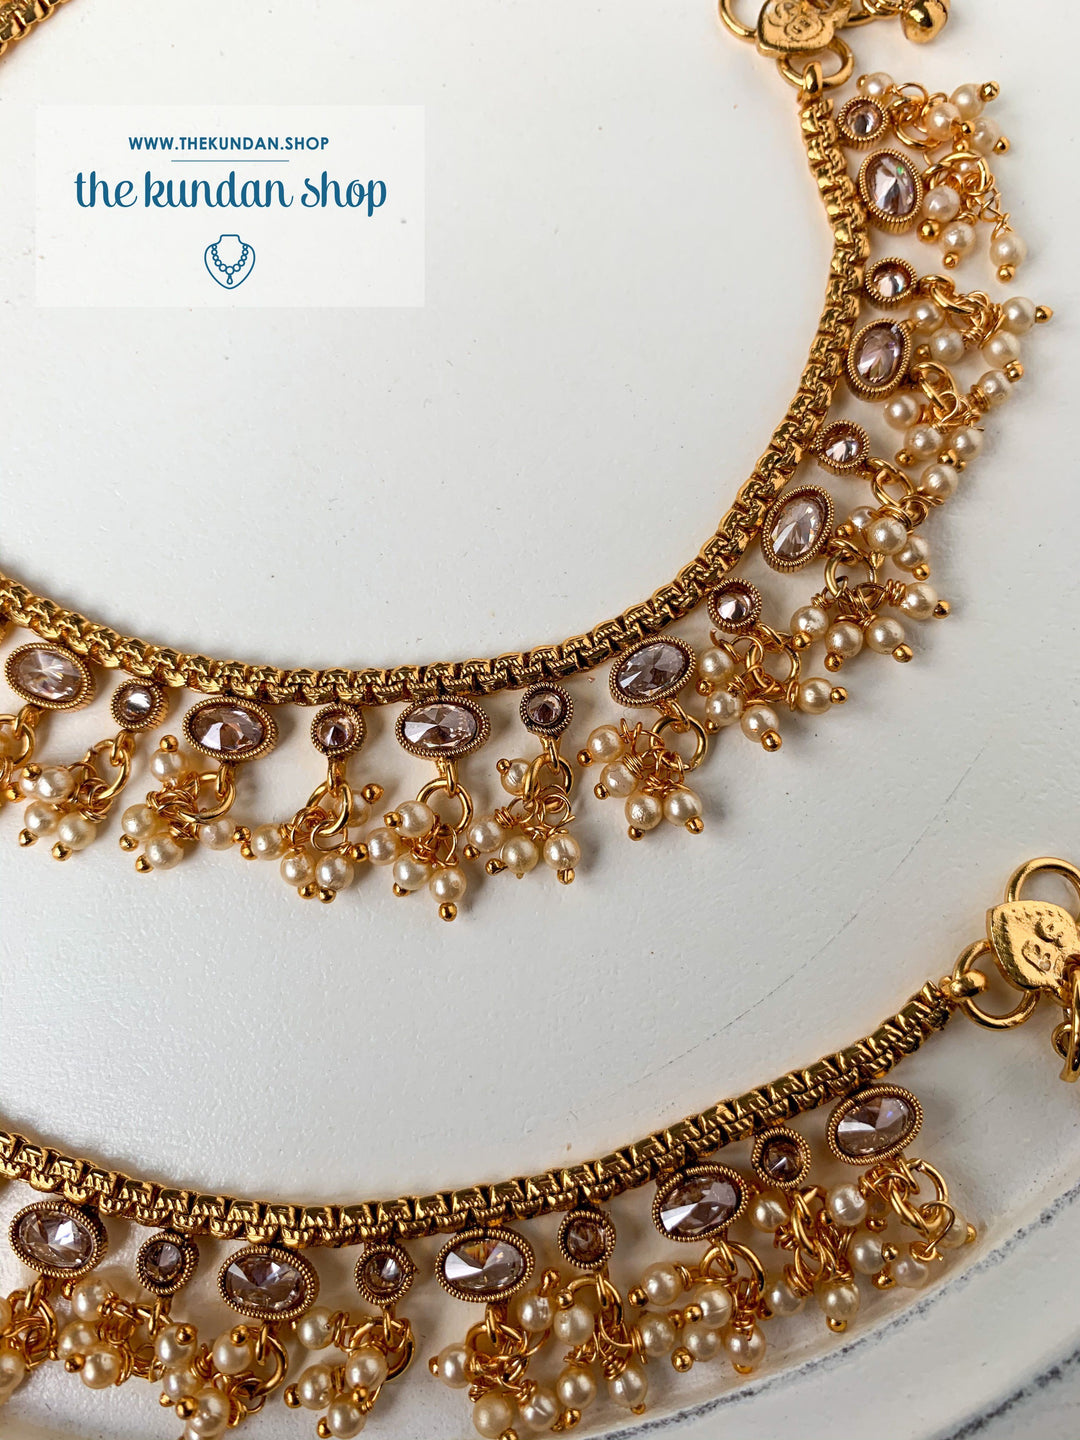 Shining Through in Bright Gold - Polki Anklets Anklets THE KUNDAN SHOP 